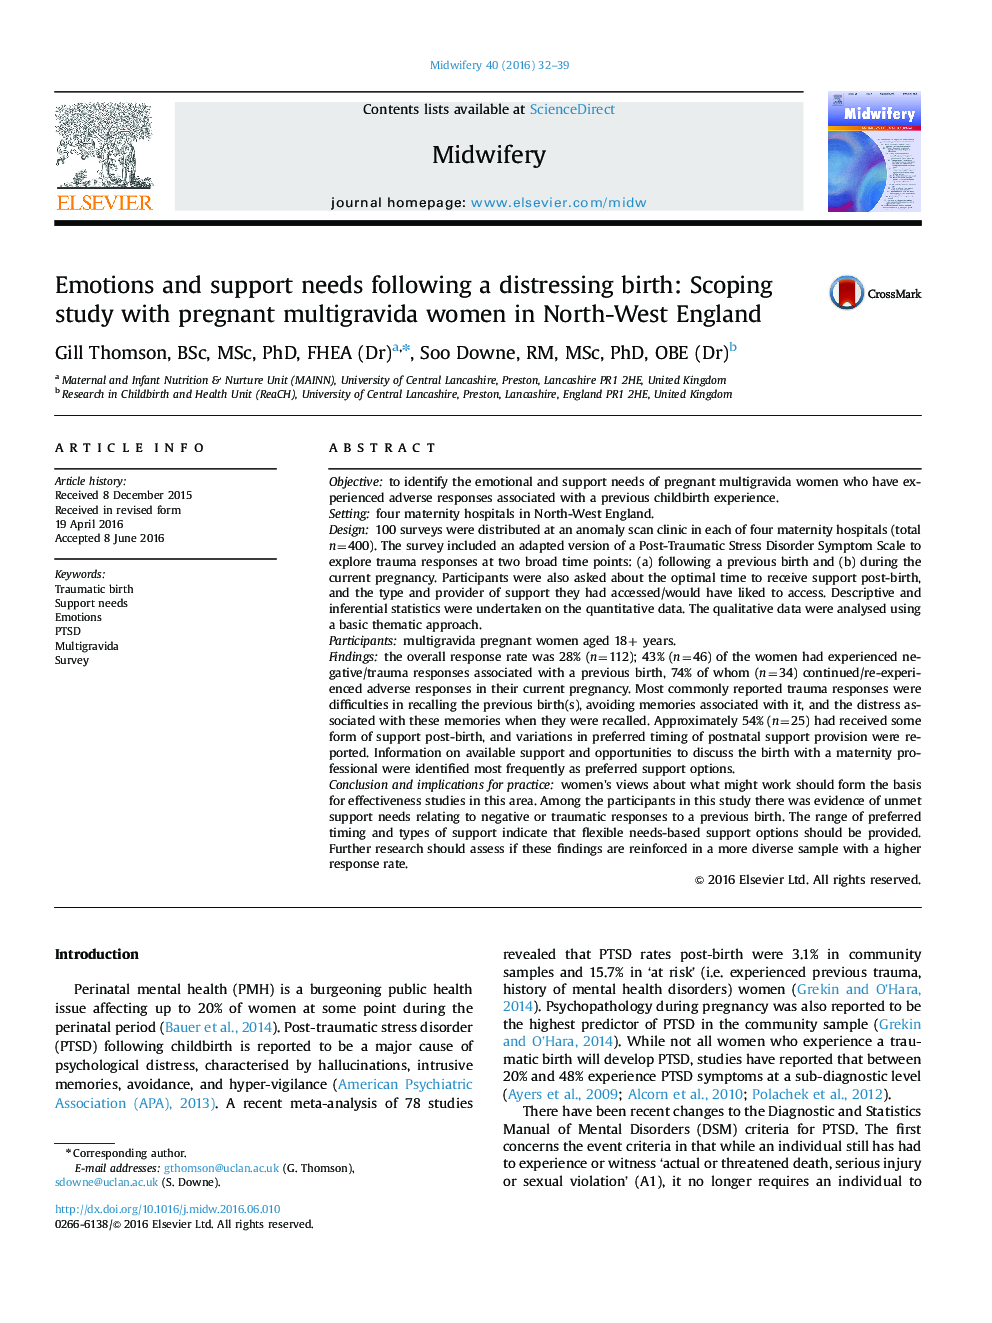 Emotions and support needs following a distressing birth: Scoping study with pregnant multigravida women in North-West England